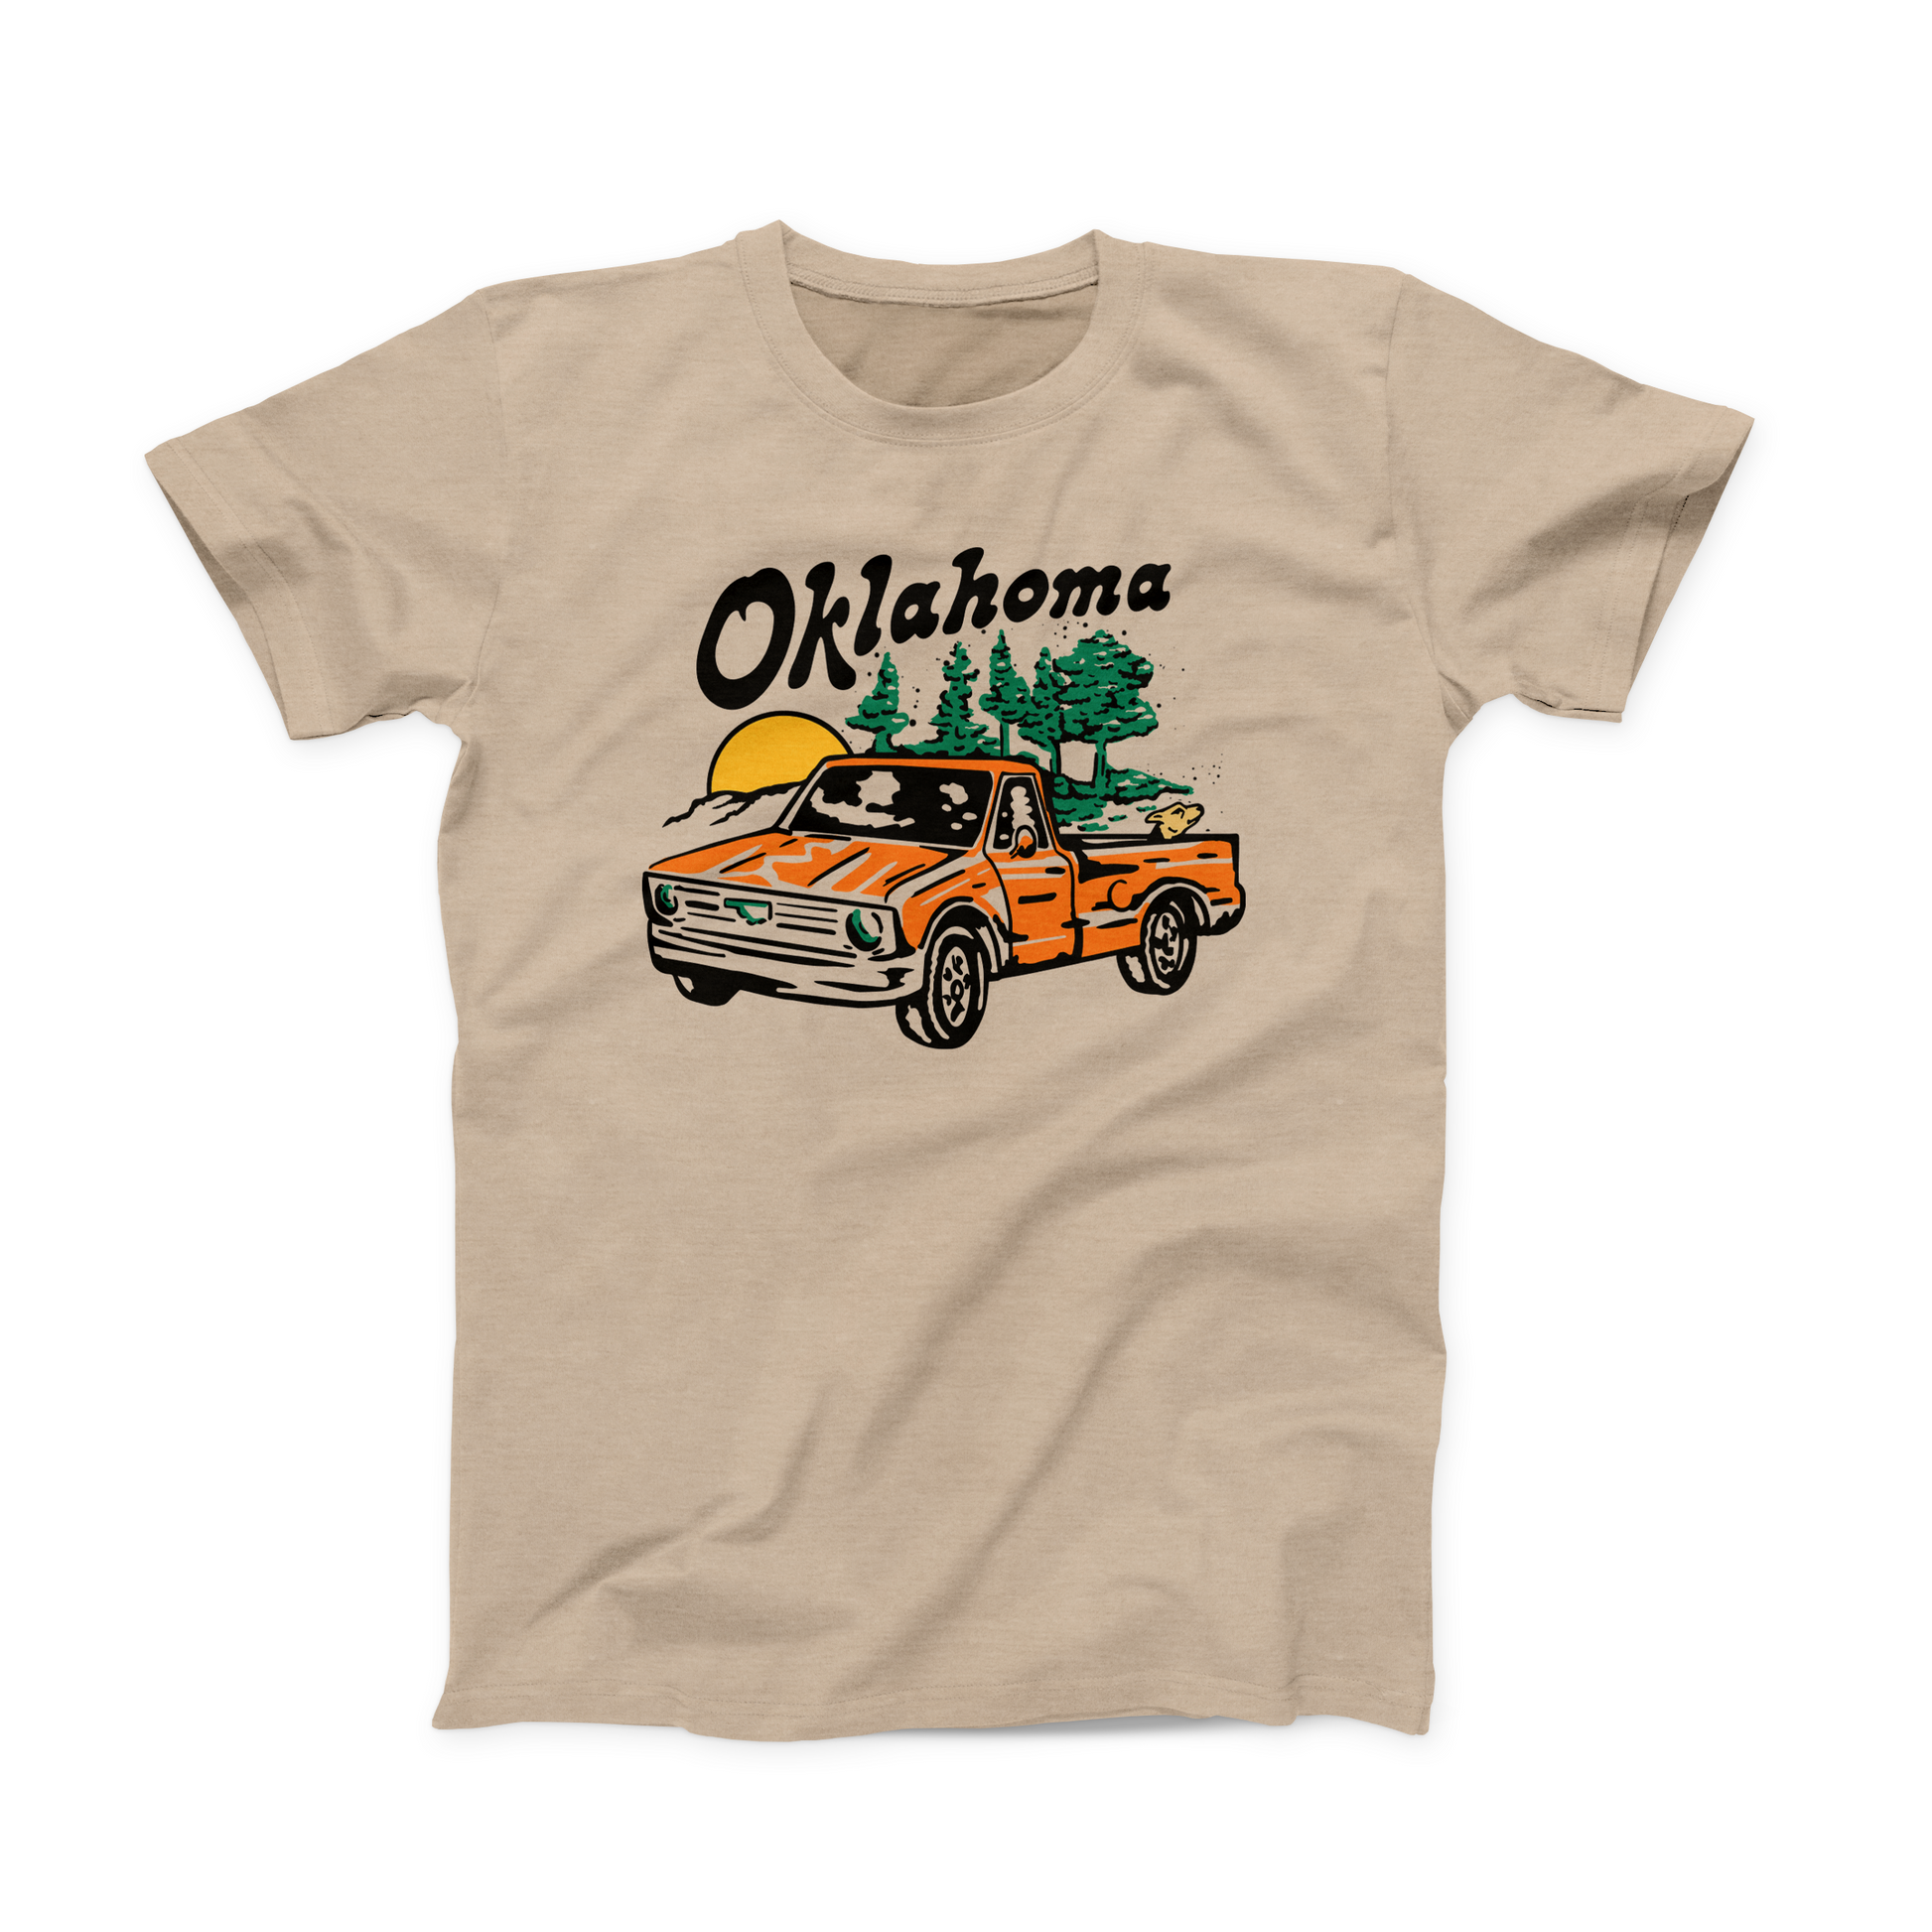 A Heather Tan Oklahoma t-shirt. The Design is of an orange, old-school truck with a dog in the bed of the truck. And in the background are green trees and a yellow setting sun. Above the design is "Oklahoma" in black, angled font. 